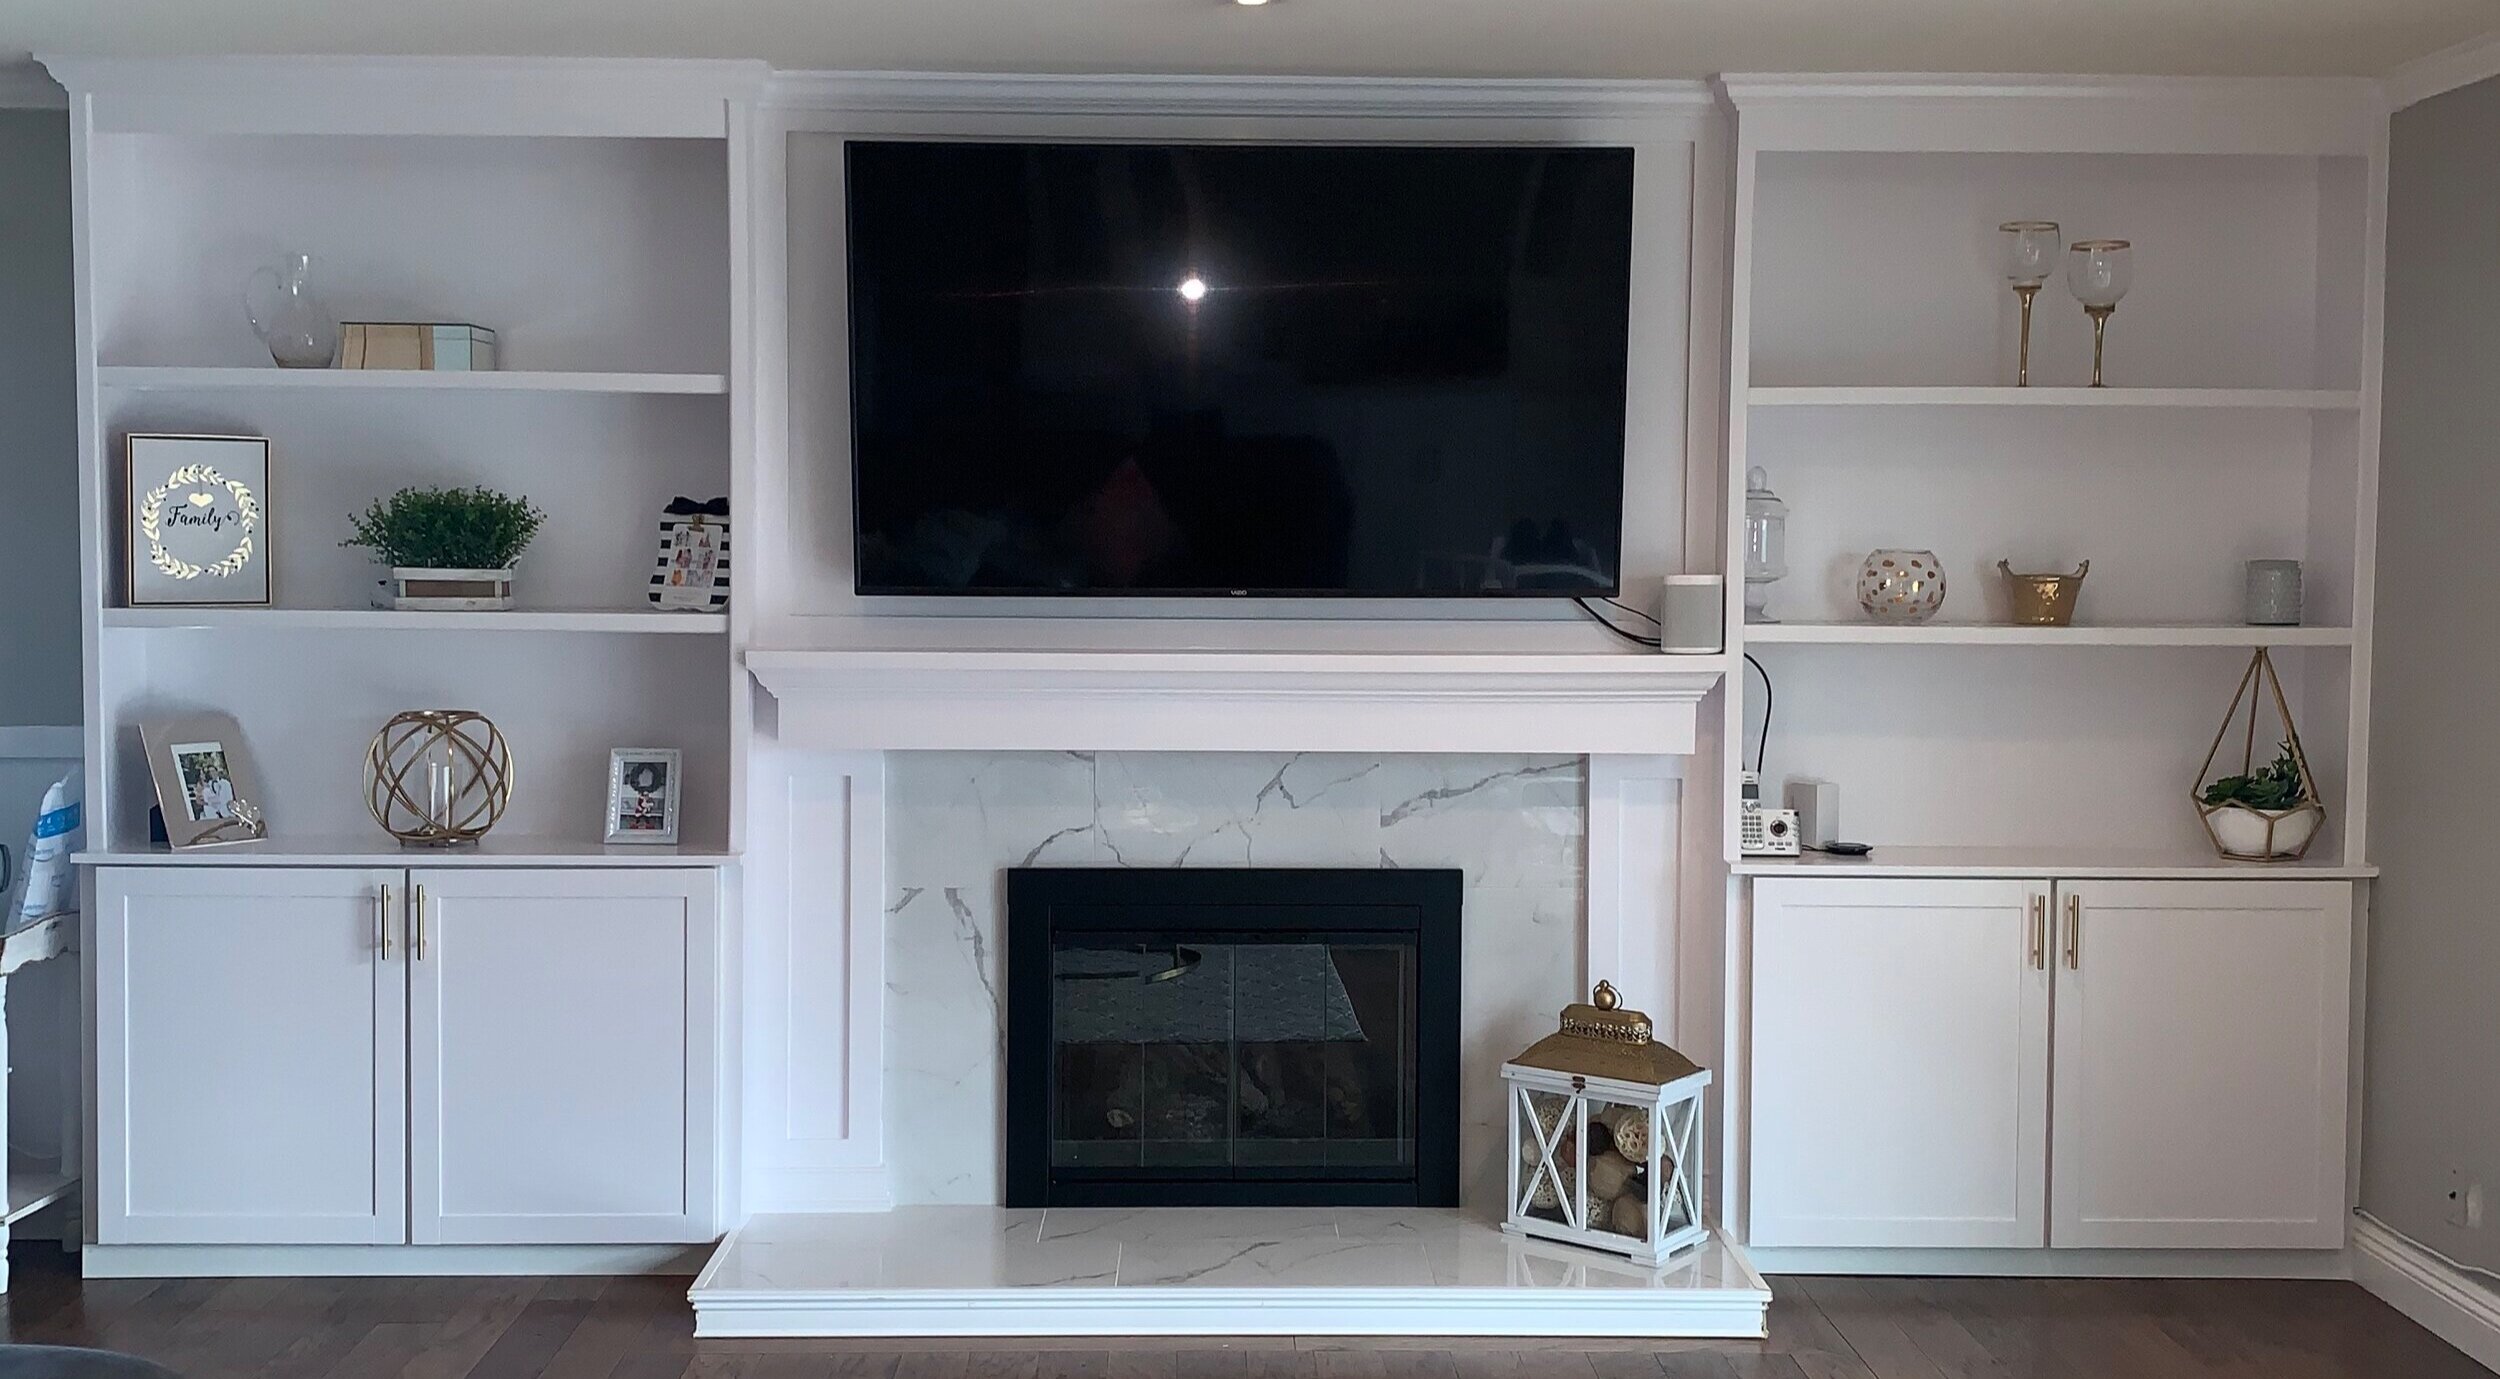 Diy Fireplace Surround And Built Ins, How To Build Cabinets Around Fireplace